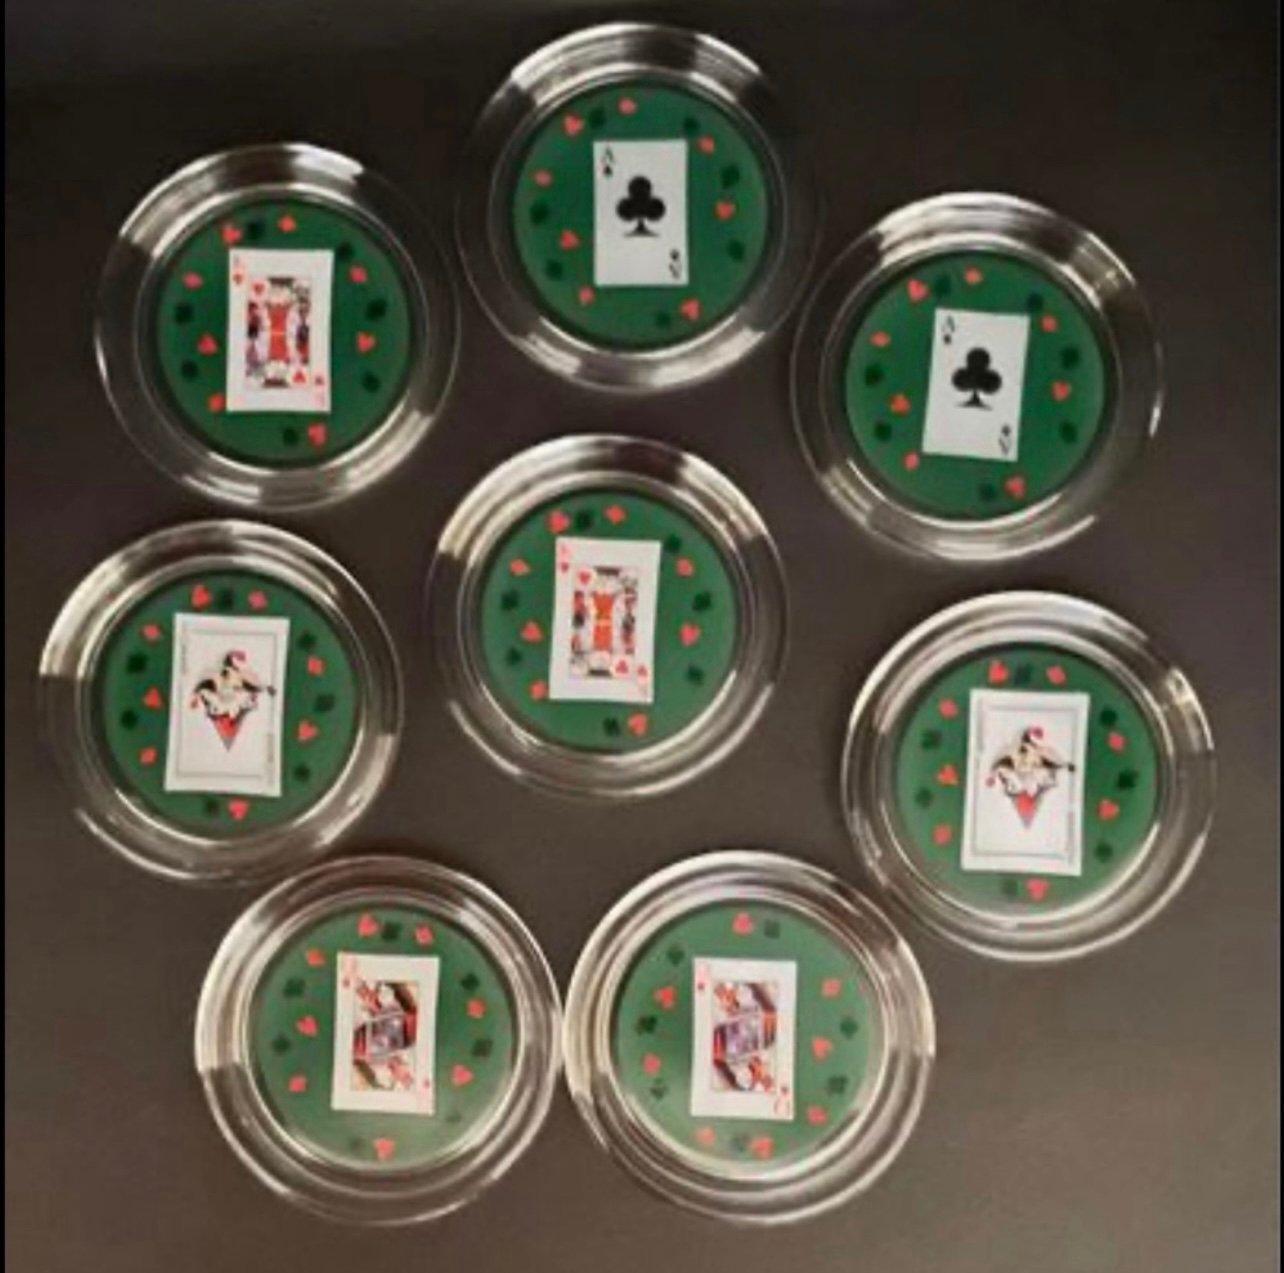 Vintage set of 8 glass 3” playing card coasters pqyVBTyTf